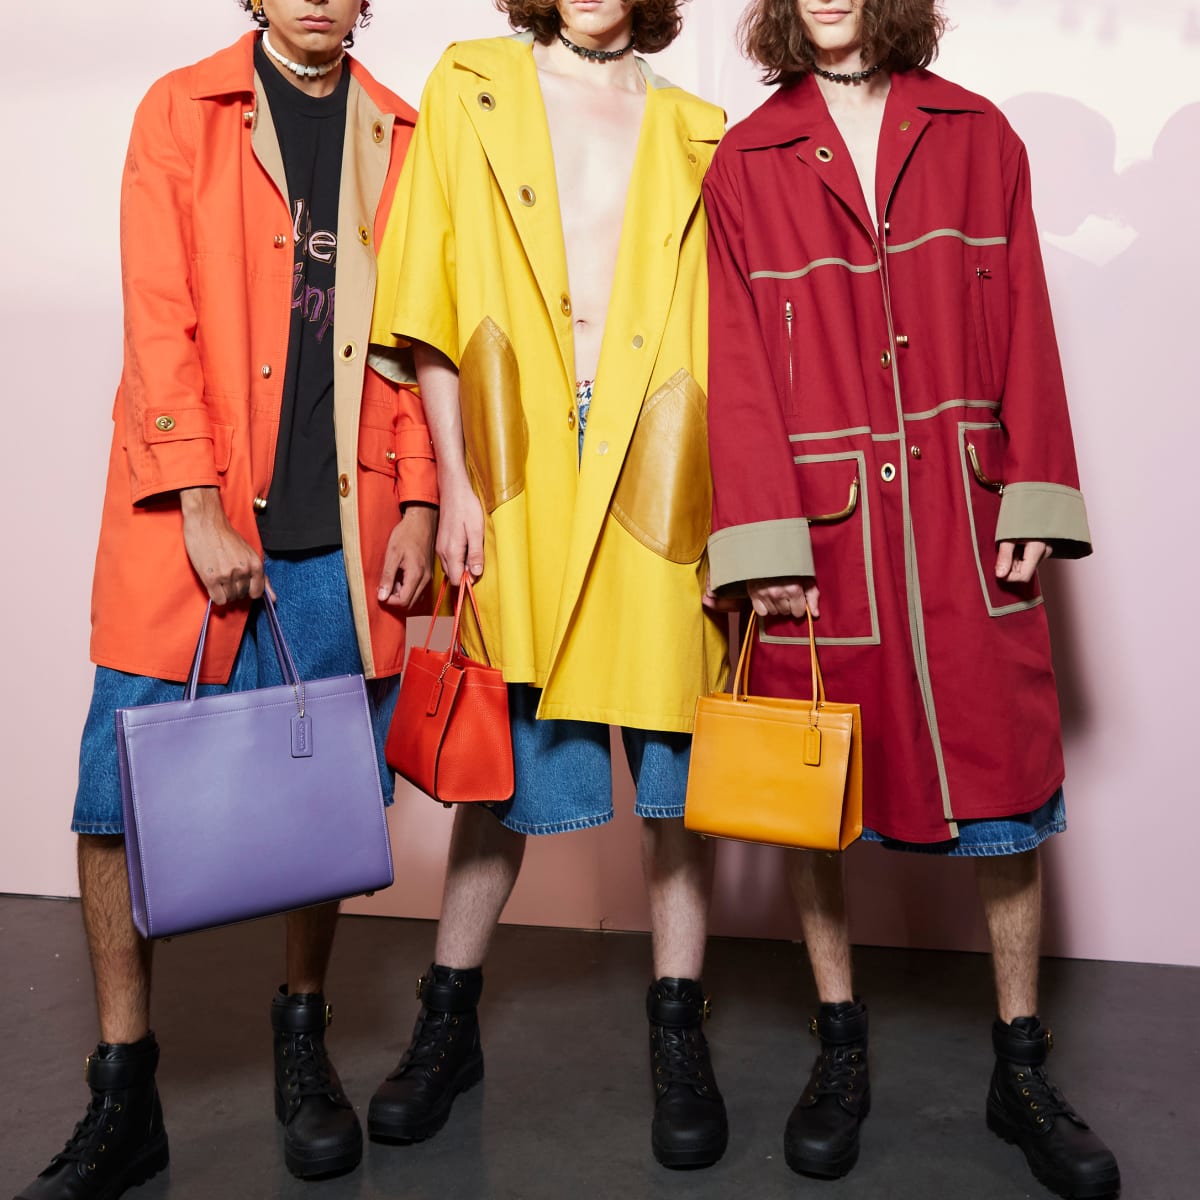 ZARA BAGS & SHOES NEW COLLECTION / FEBRUARY 2022 